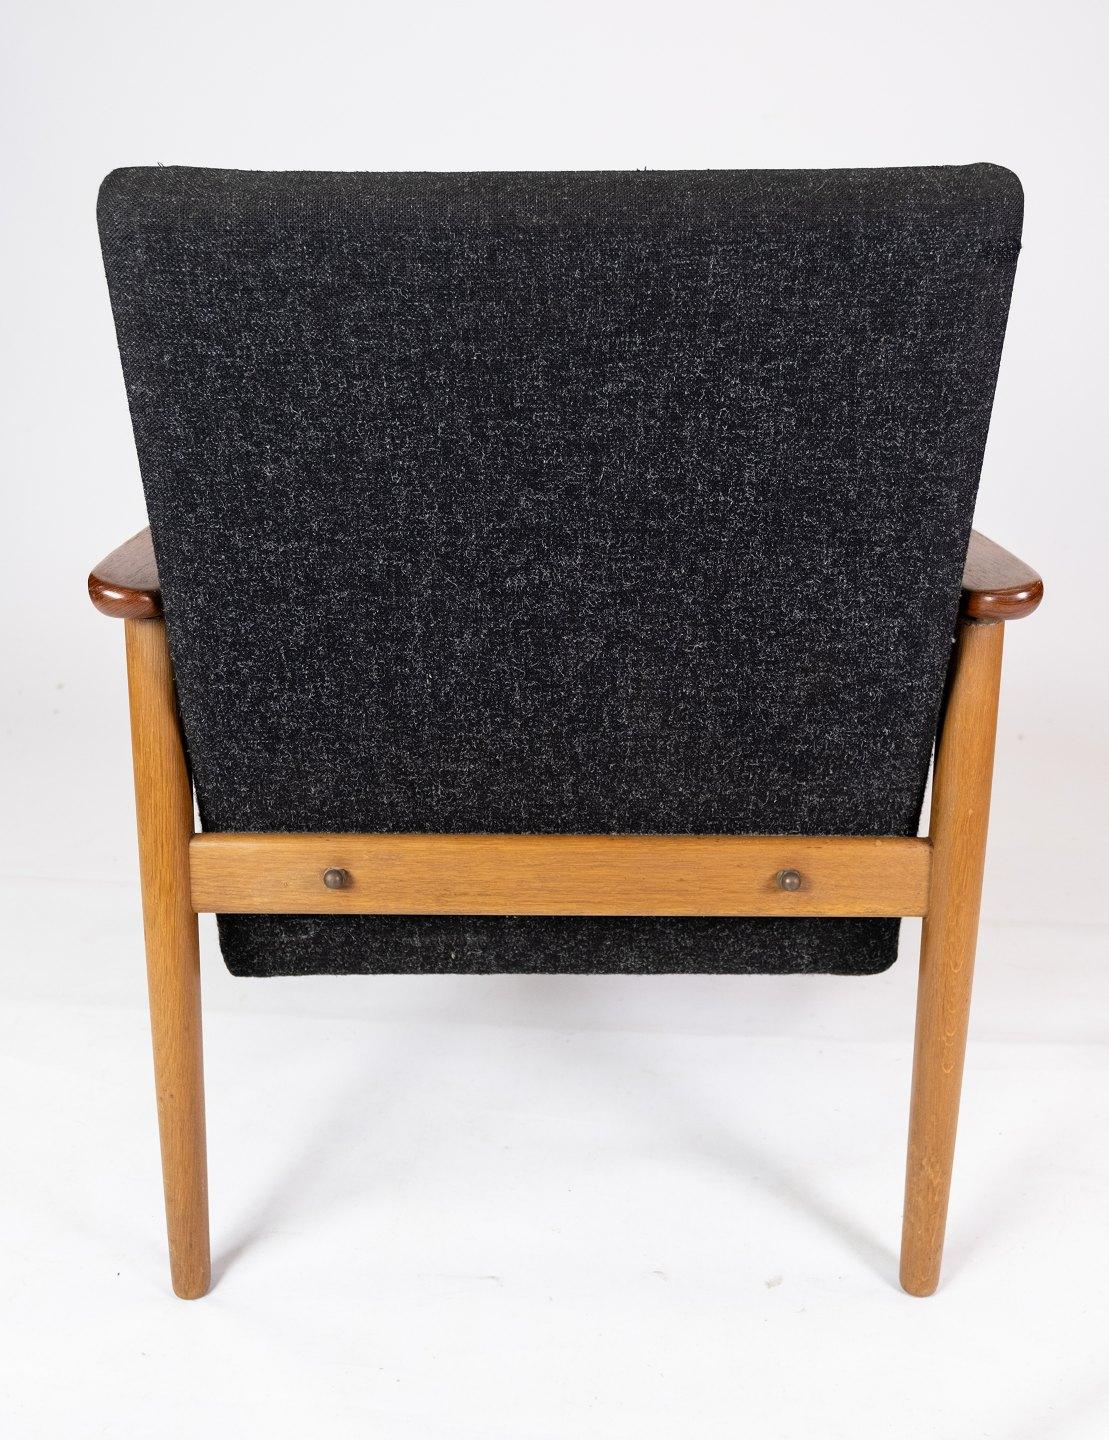 Mid-20th Century Easy Chair With Stool Made In Teak & Dark Wool Fabric From 1960s For Sale